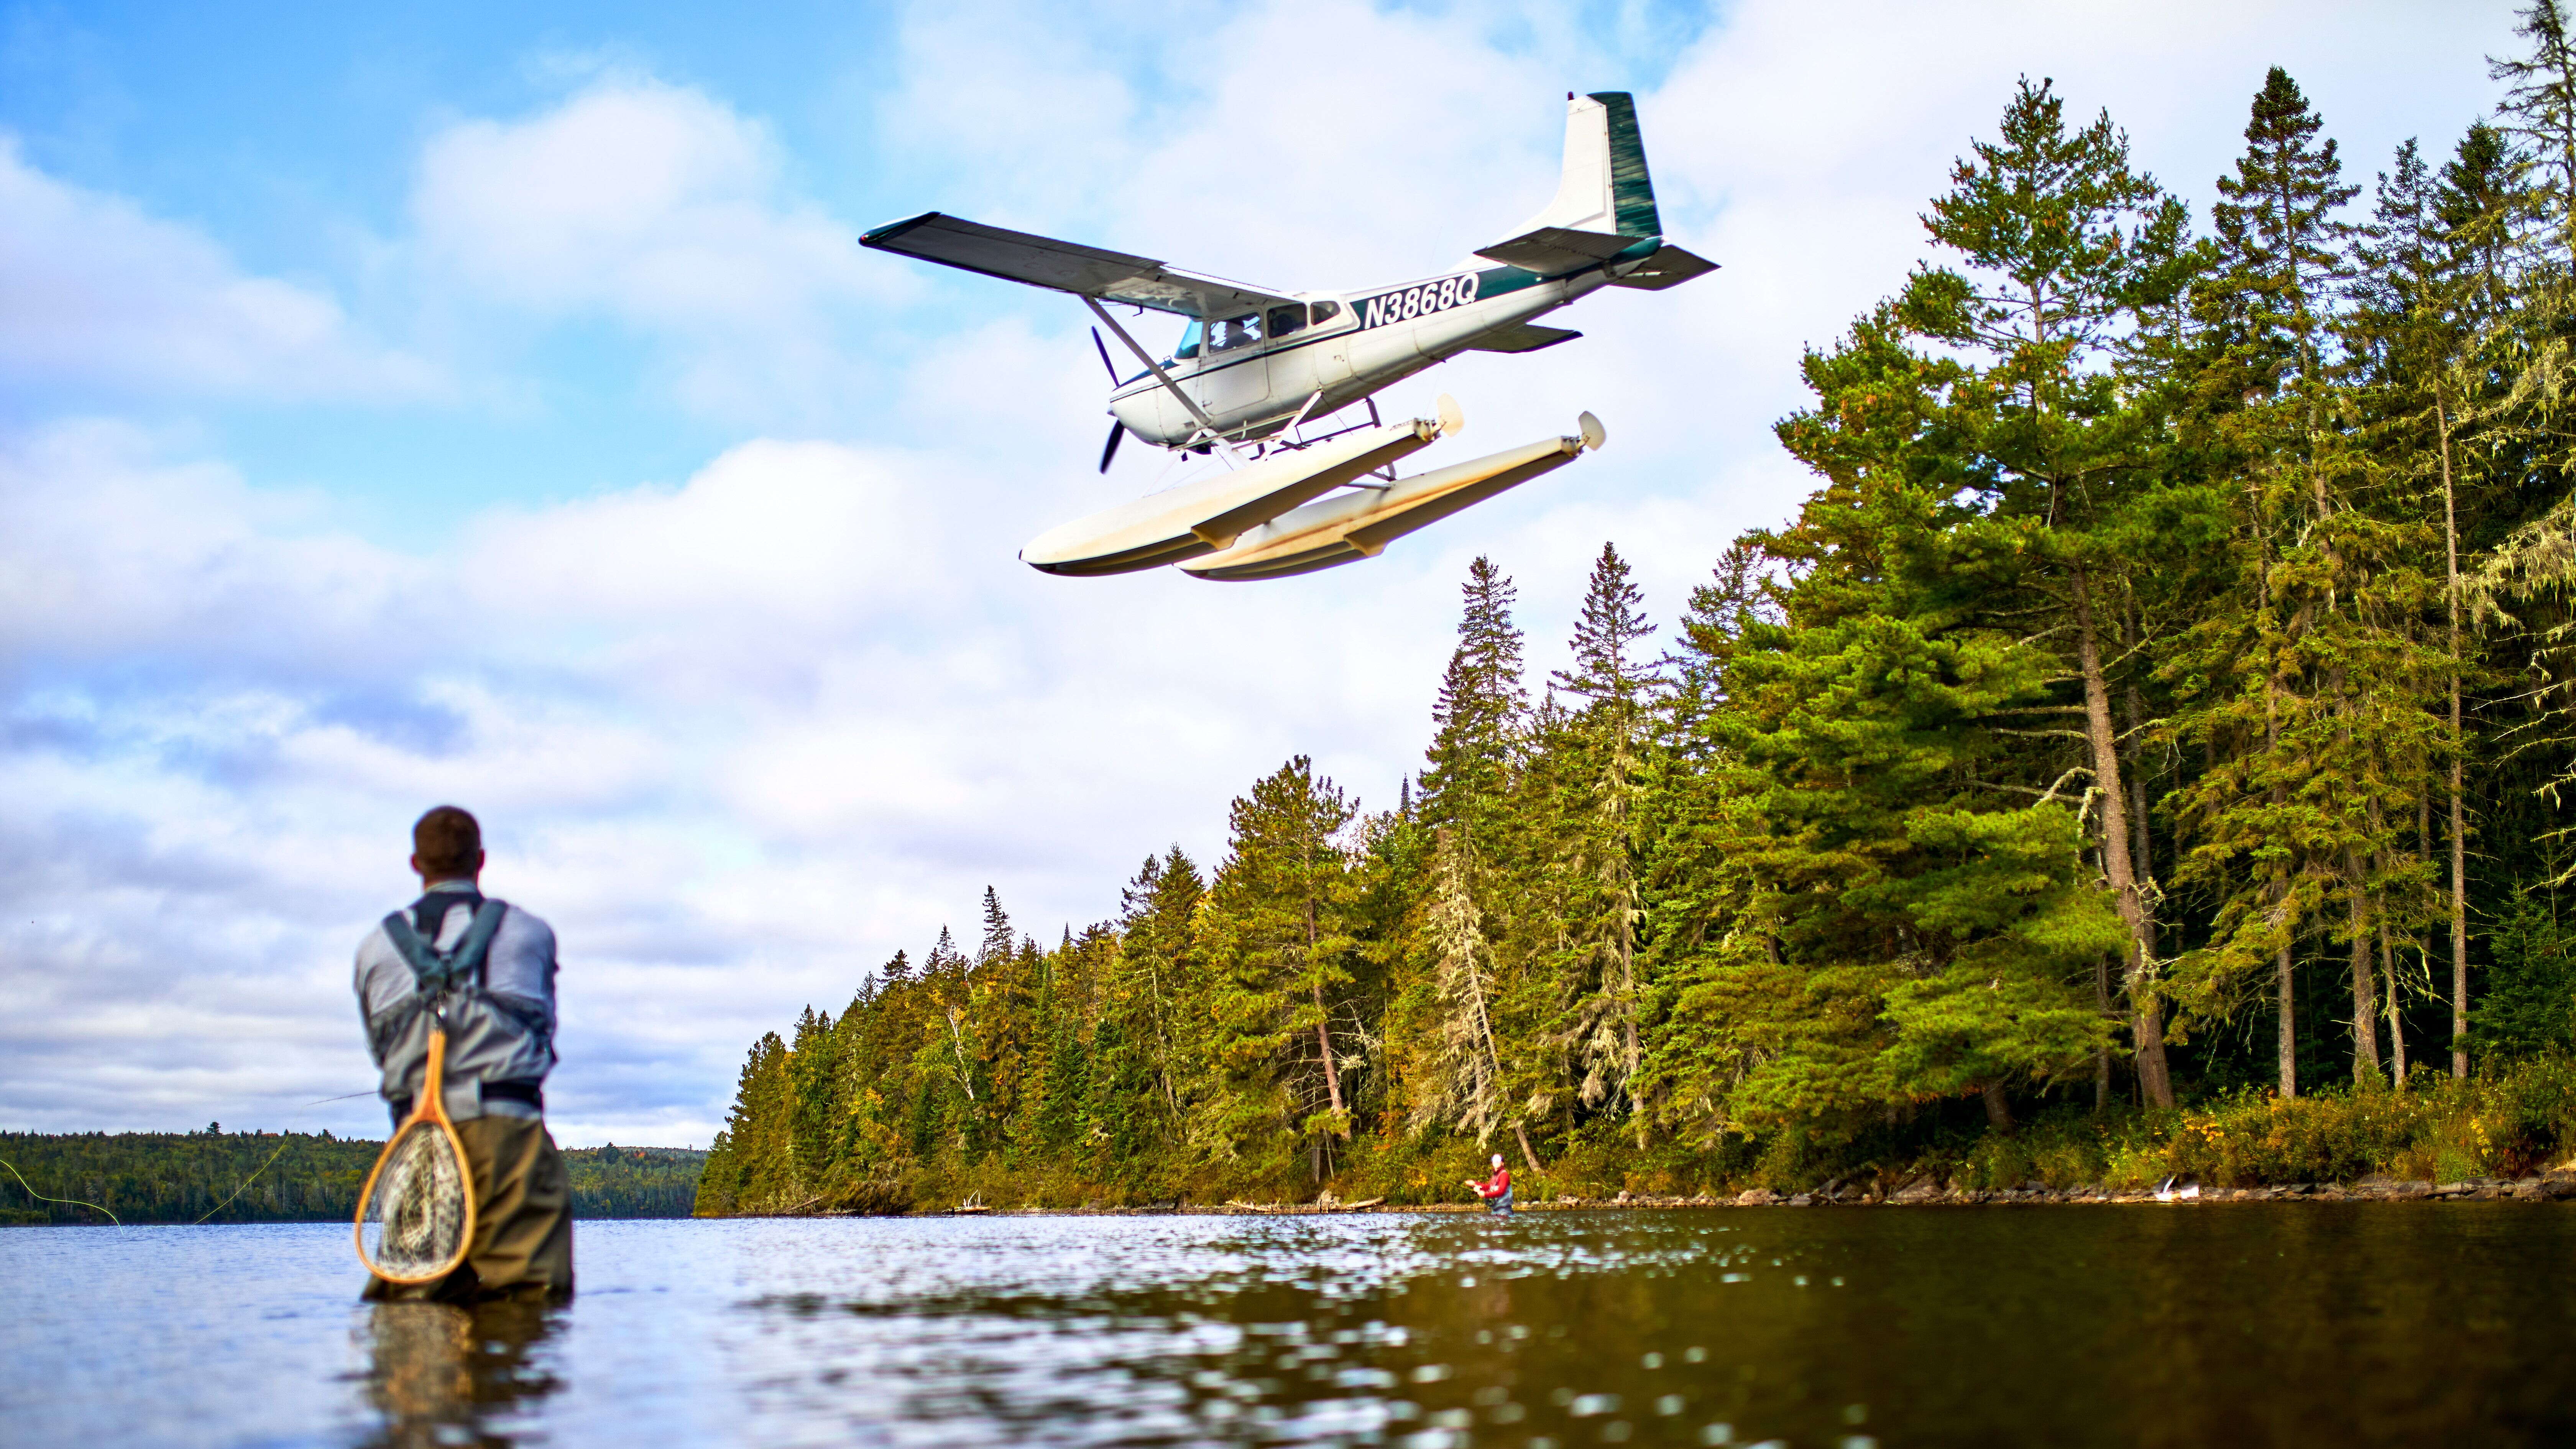 Fisherman in water, plane above 